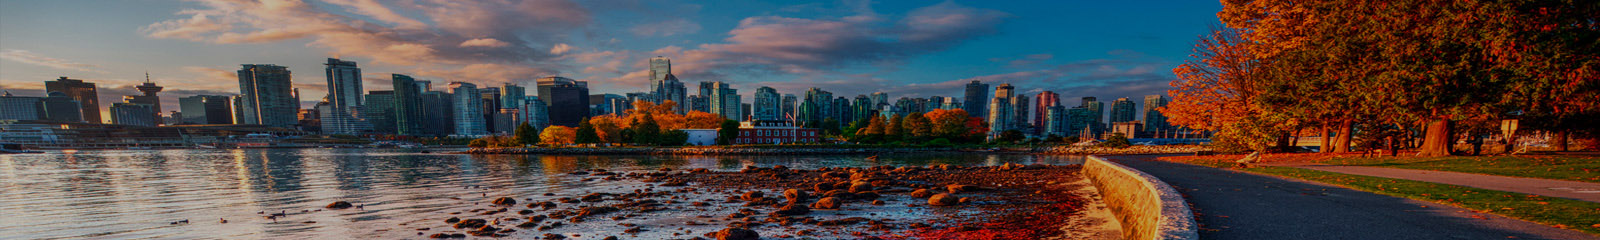 The cost of living in Vancouver has its advantages and disadvantages, but still offers citizens its own distinctive features to explore. 
